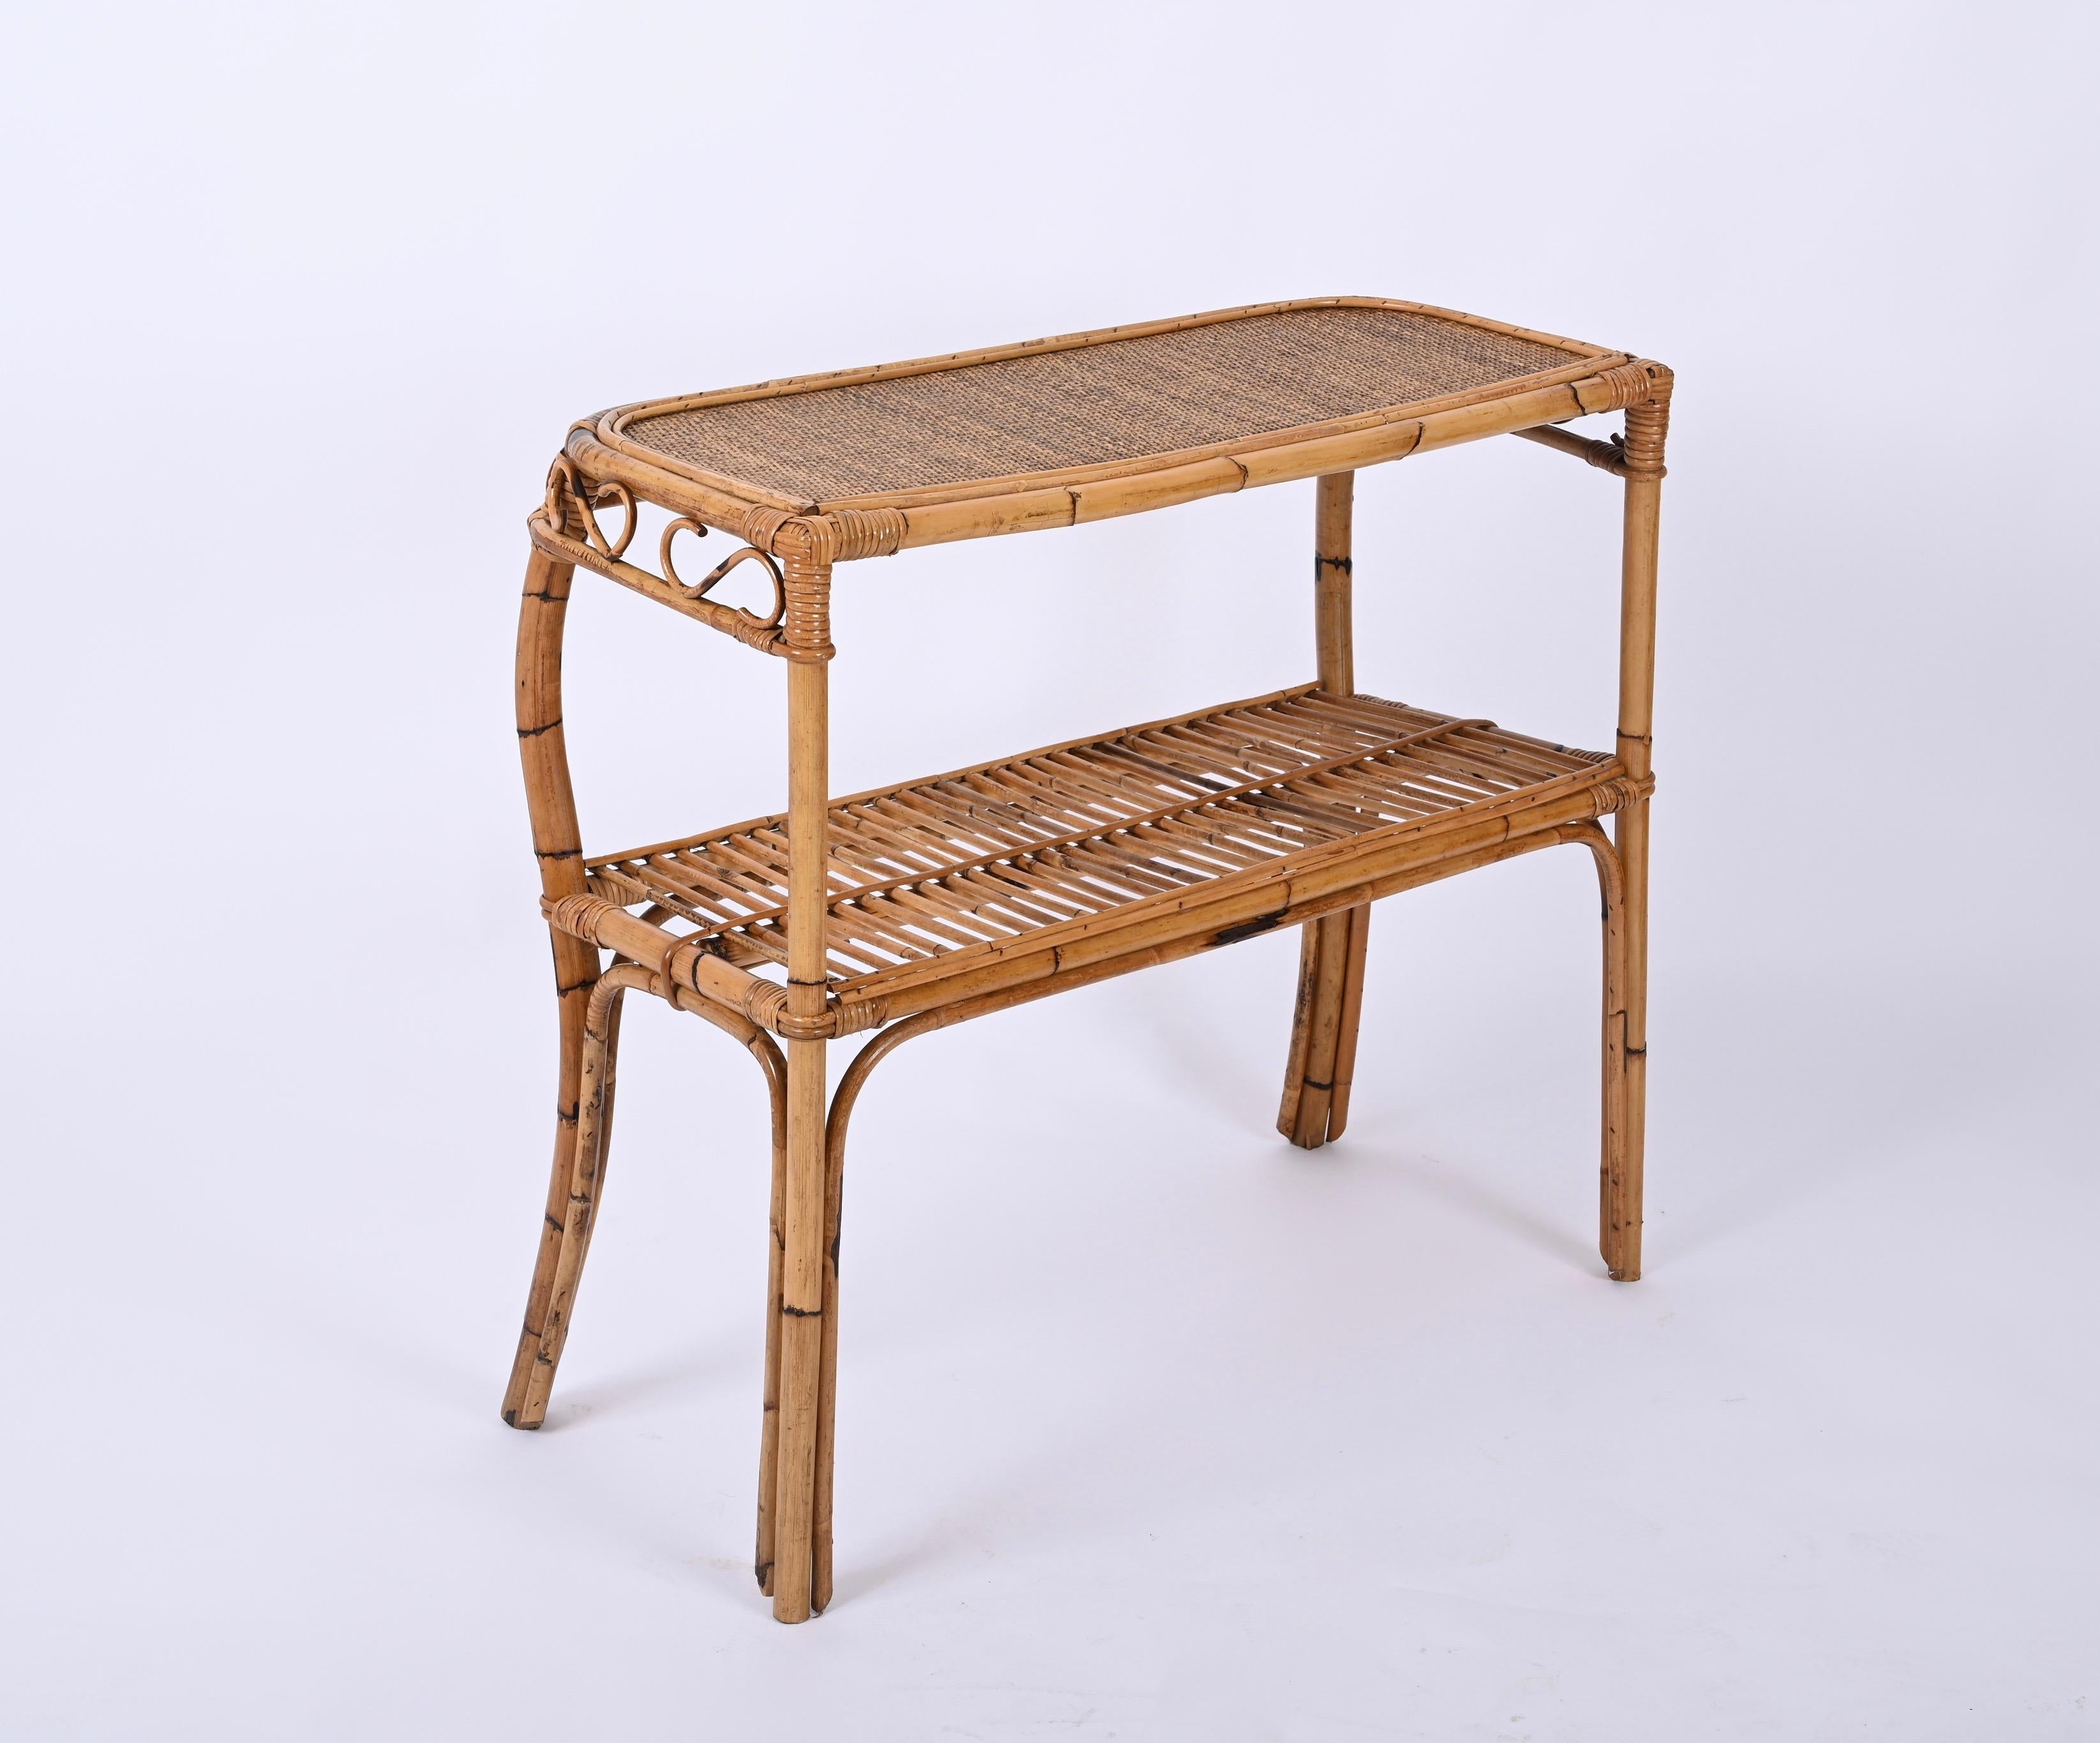 Midcentury Bamboo and Rattan Console Table, Franco Albini, Italy, 1960s For Sale 5